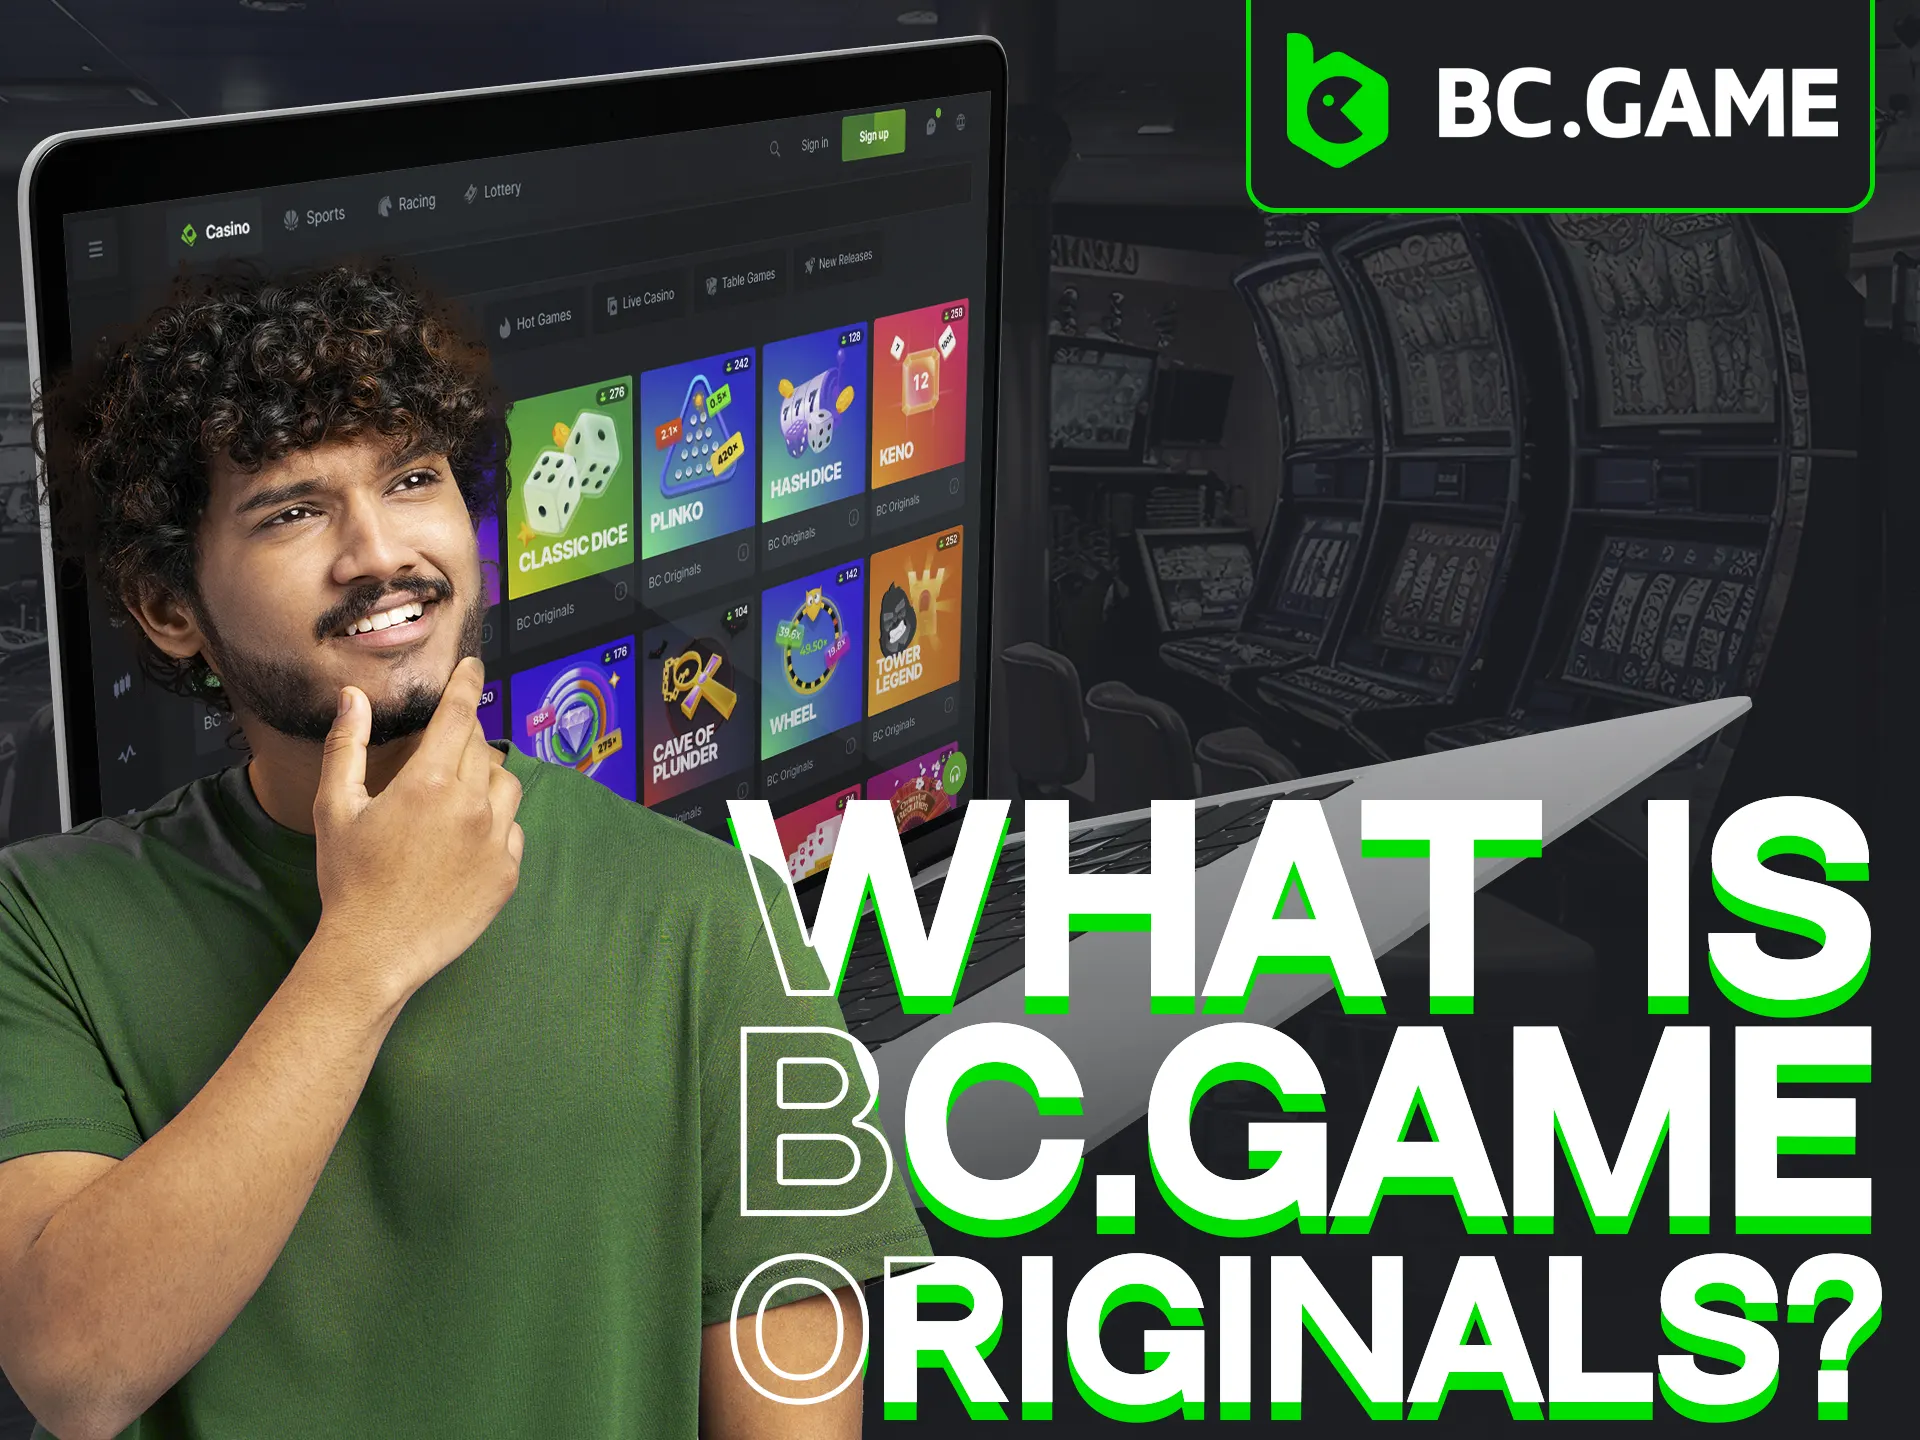 Exclusive games only at BC Game.